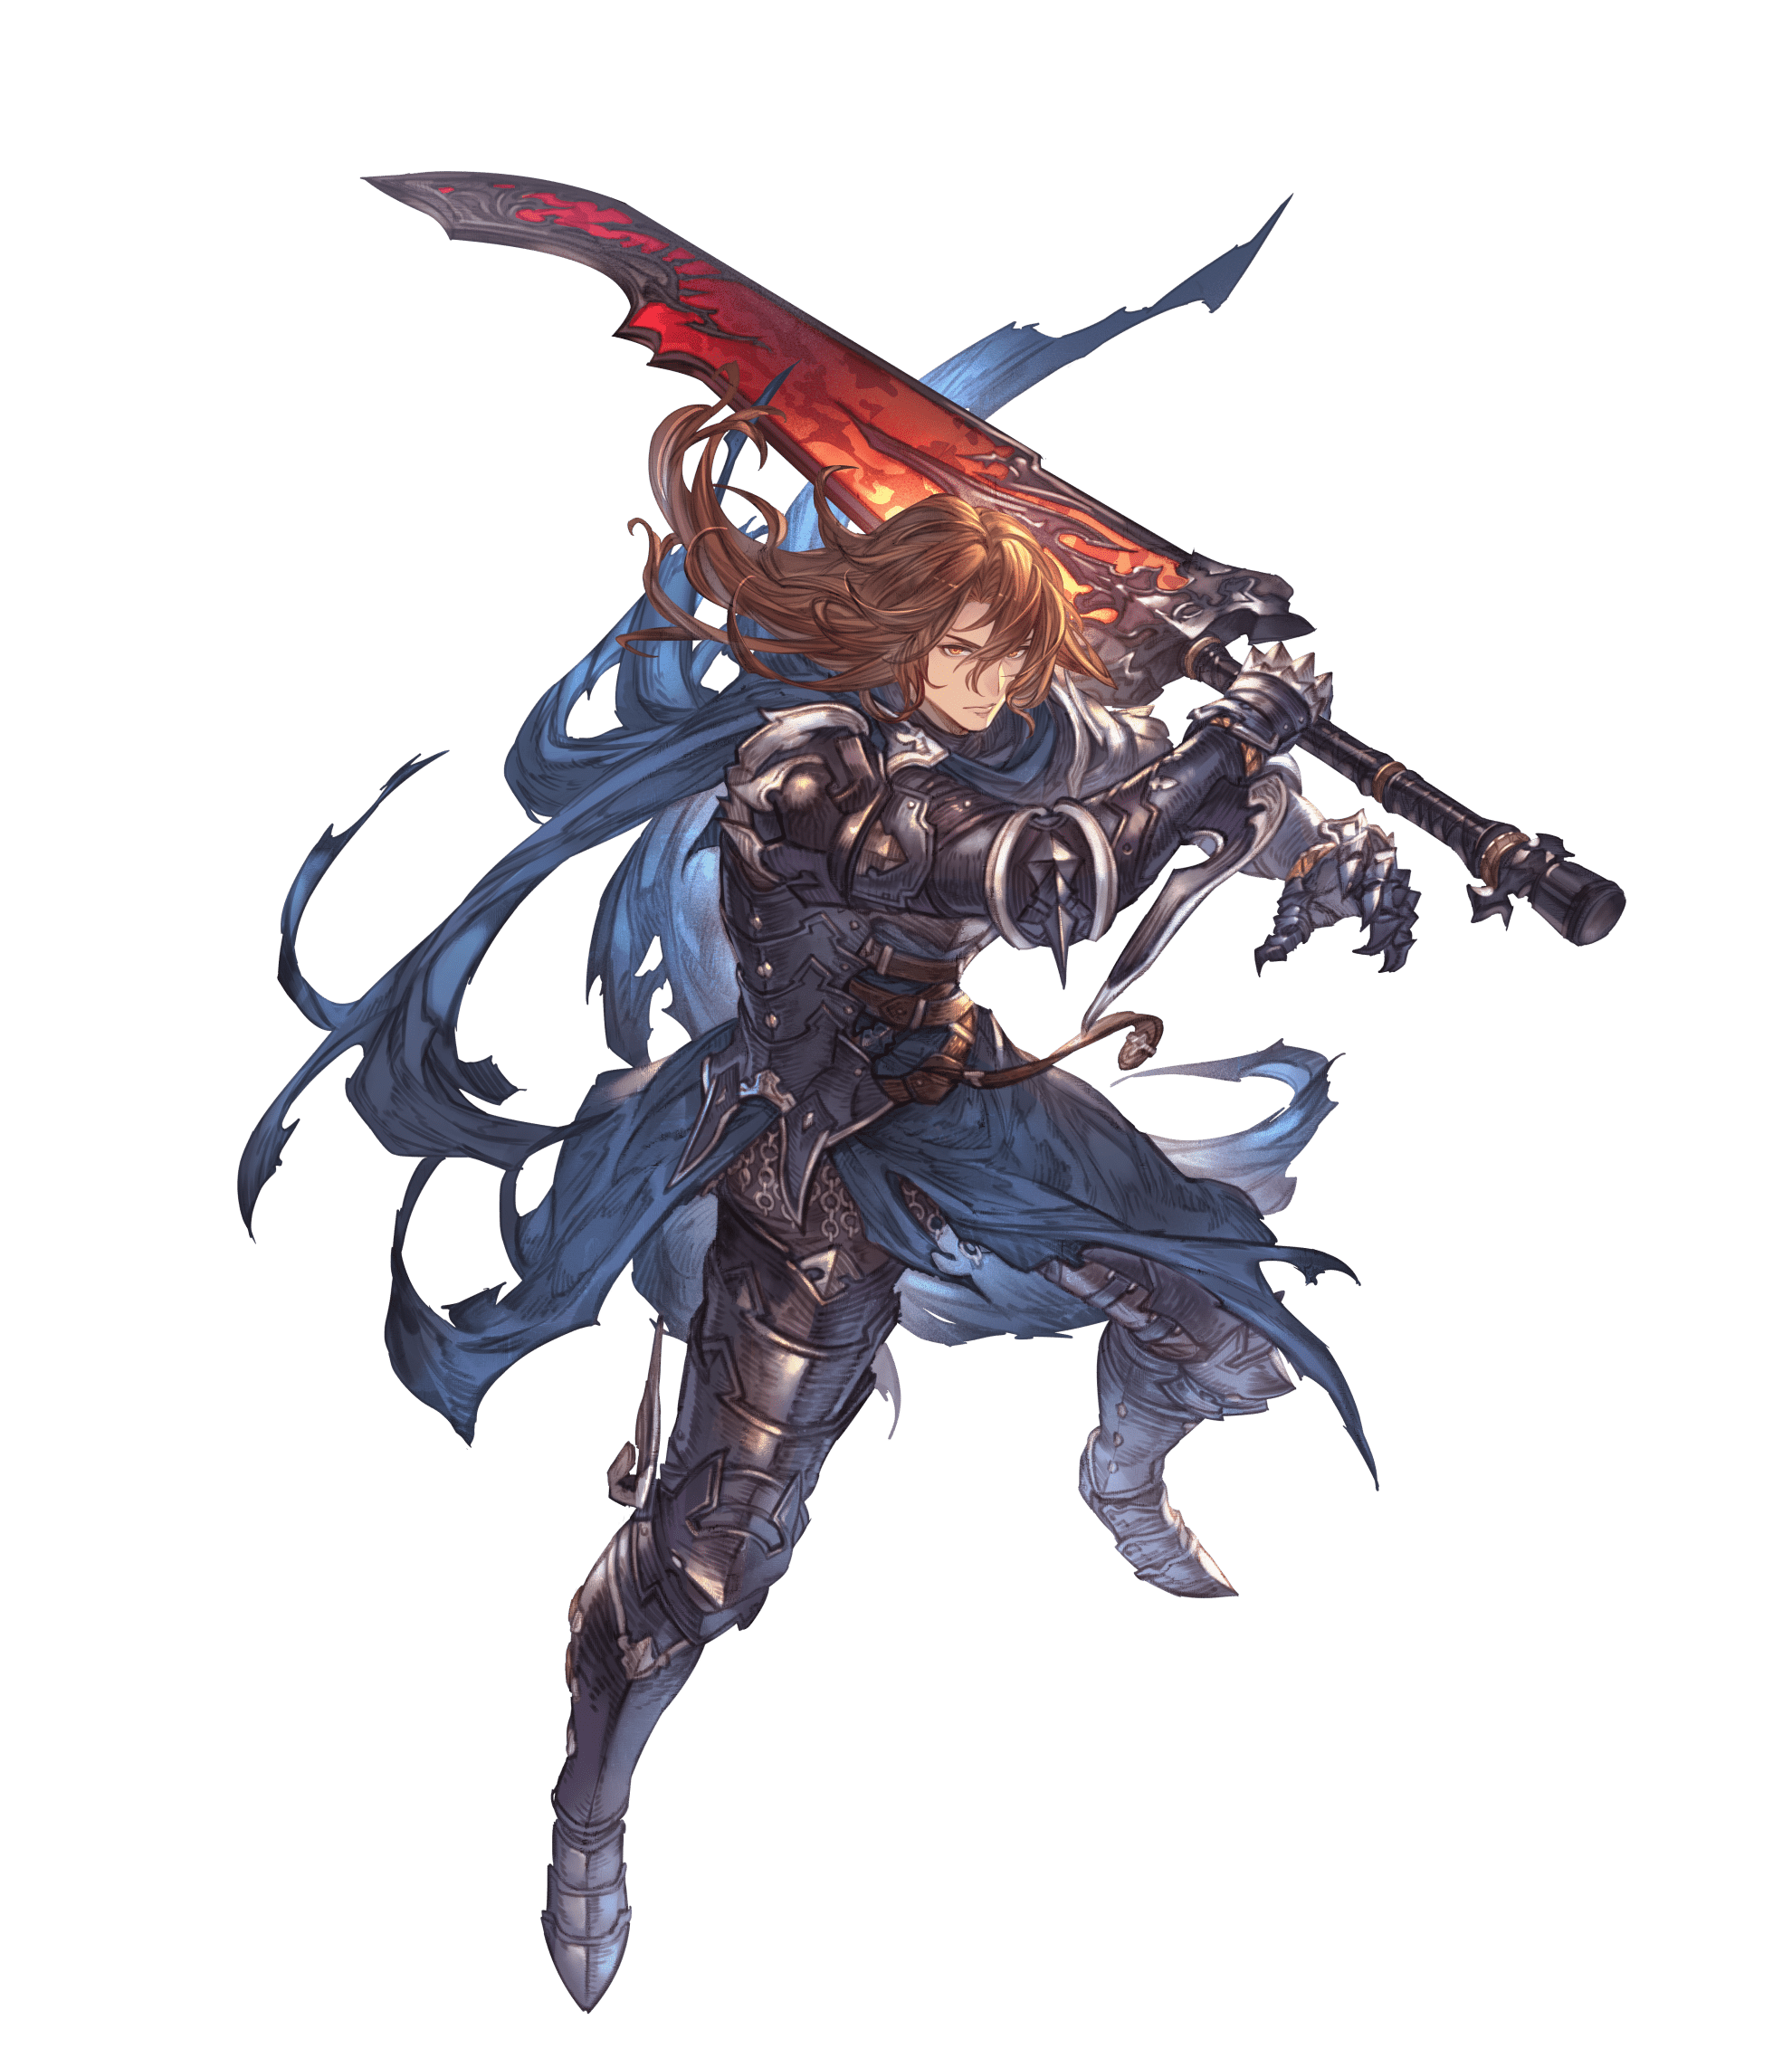 Granblue Fantasy Versus: Rising adds Siegfried, PS5 and PS4 online